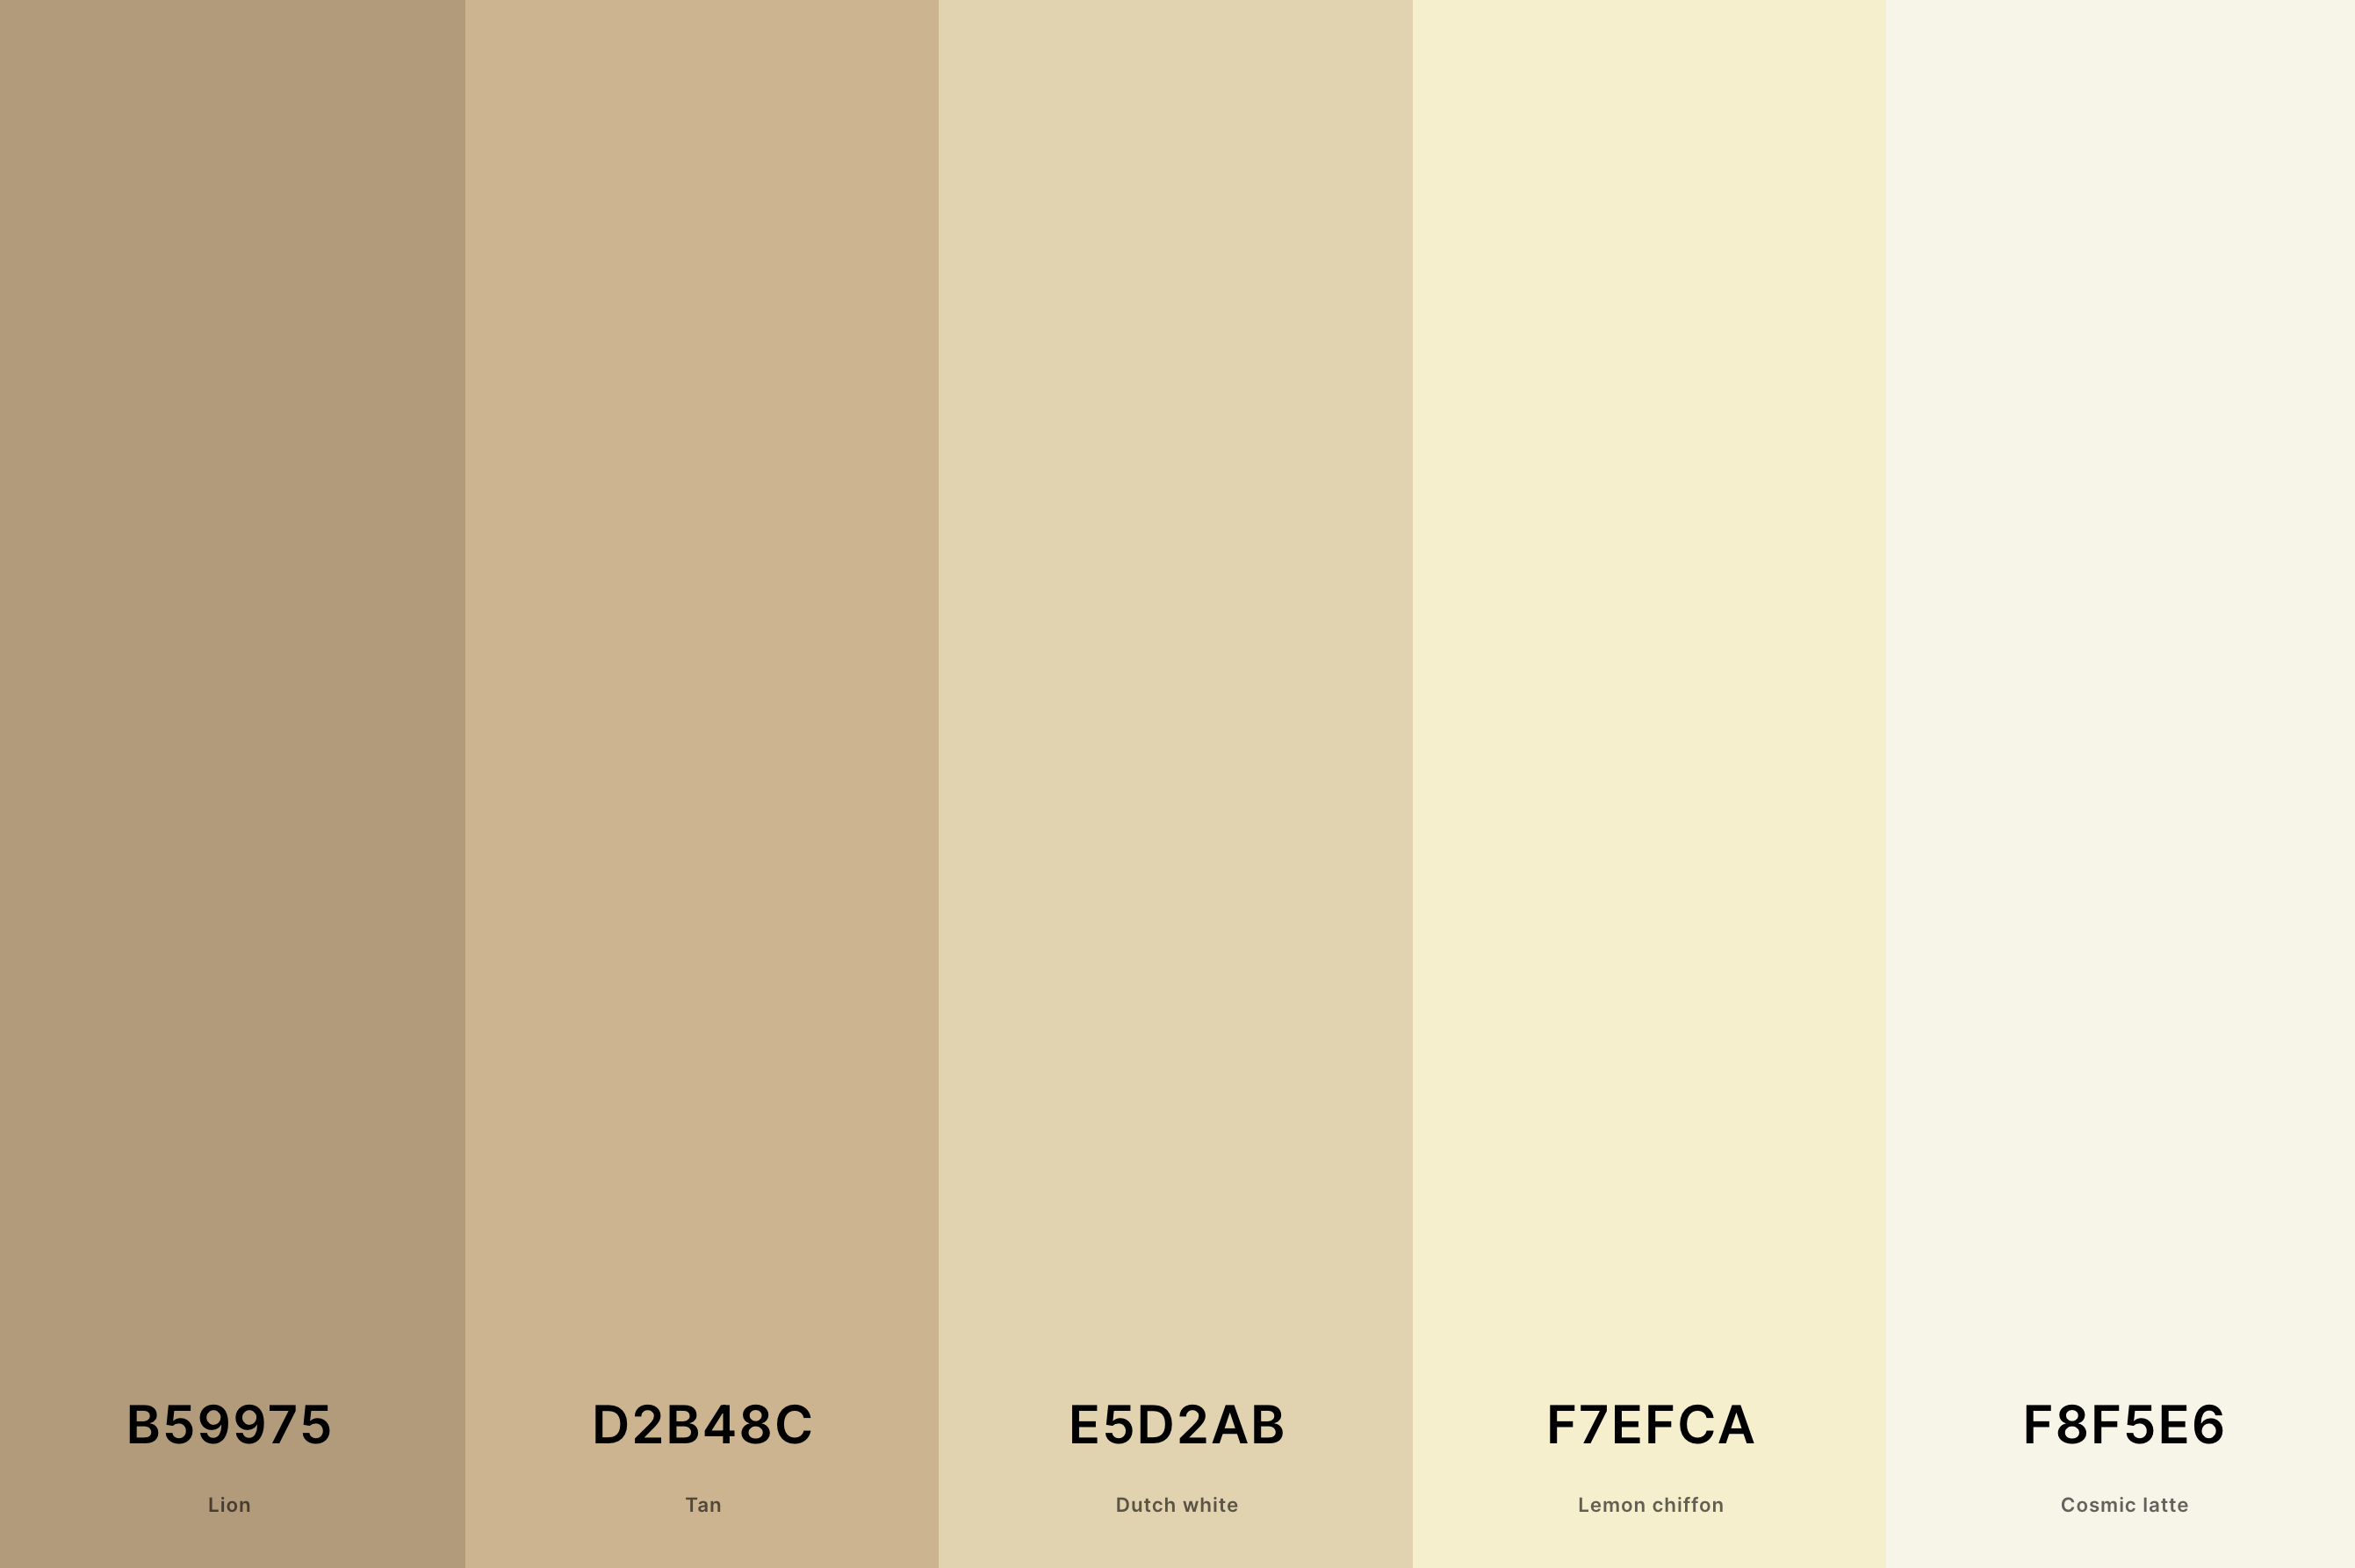 23. Tan And Cream Color Palette Color Palette with Lion (Hex #B59975) + Tan (Hex #D2B48C) + Dutch White (Hex #E5D2AB) + Lemon Chiffon (Hex #F7EFCA) + Cosmic Latte (Hex #F8F5E6) Color Palette with Hex Codes